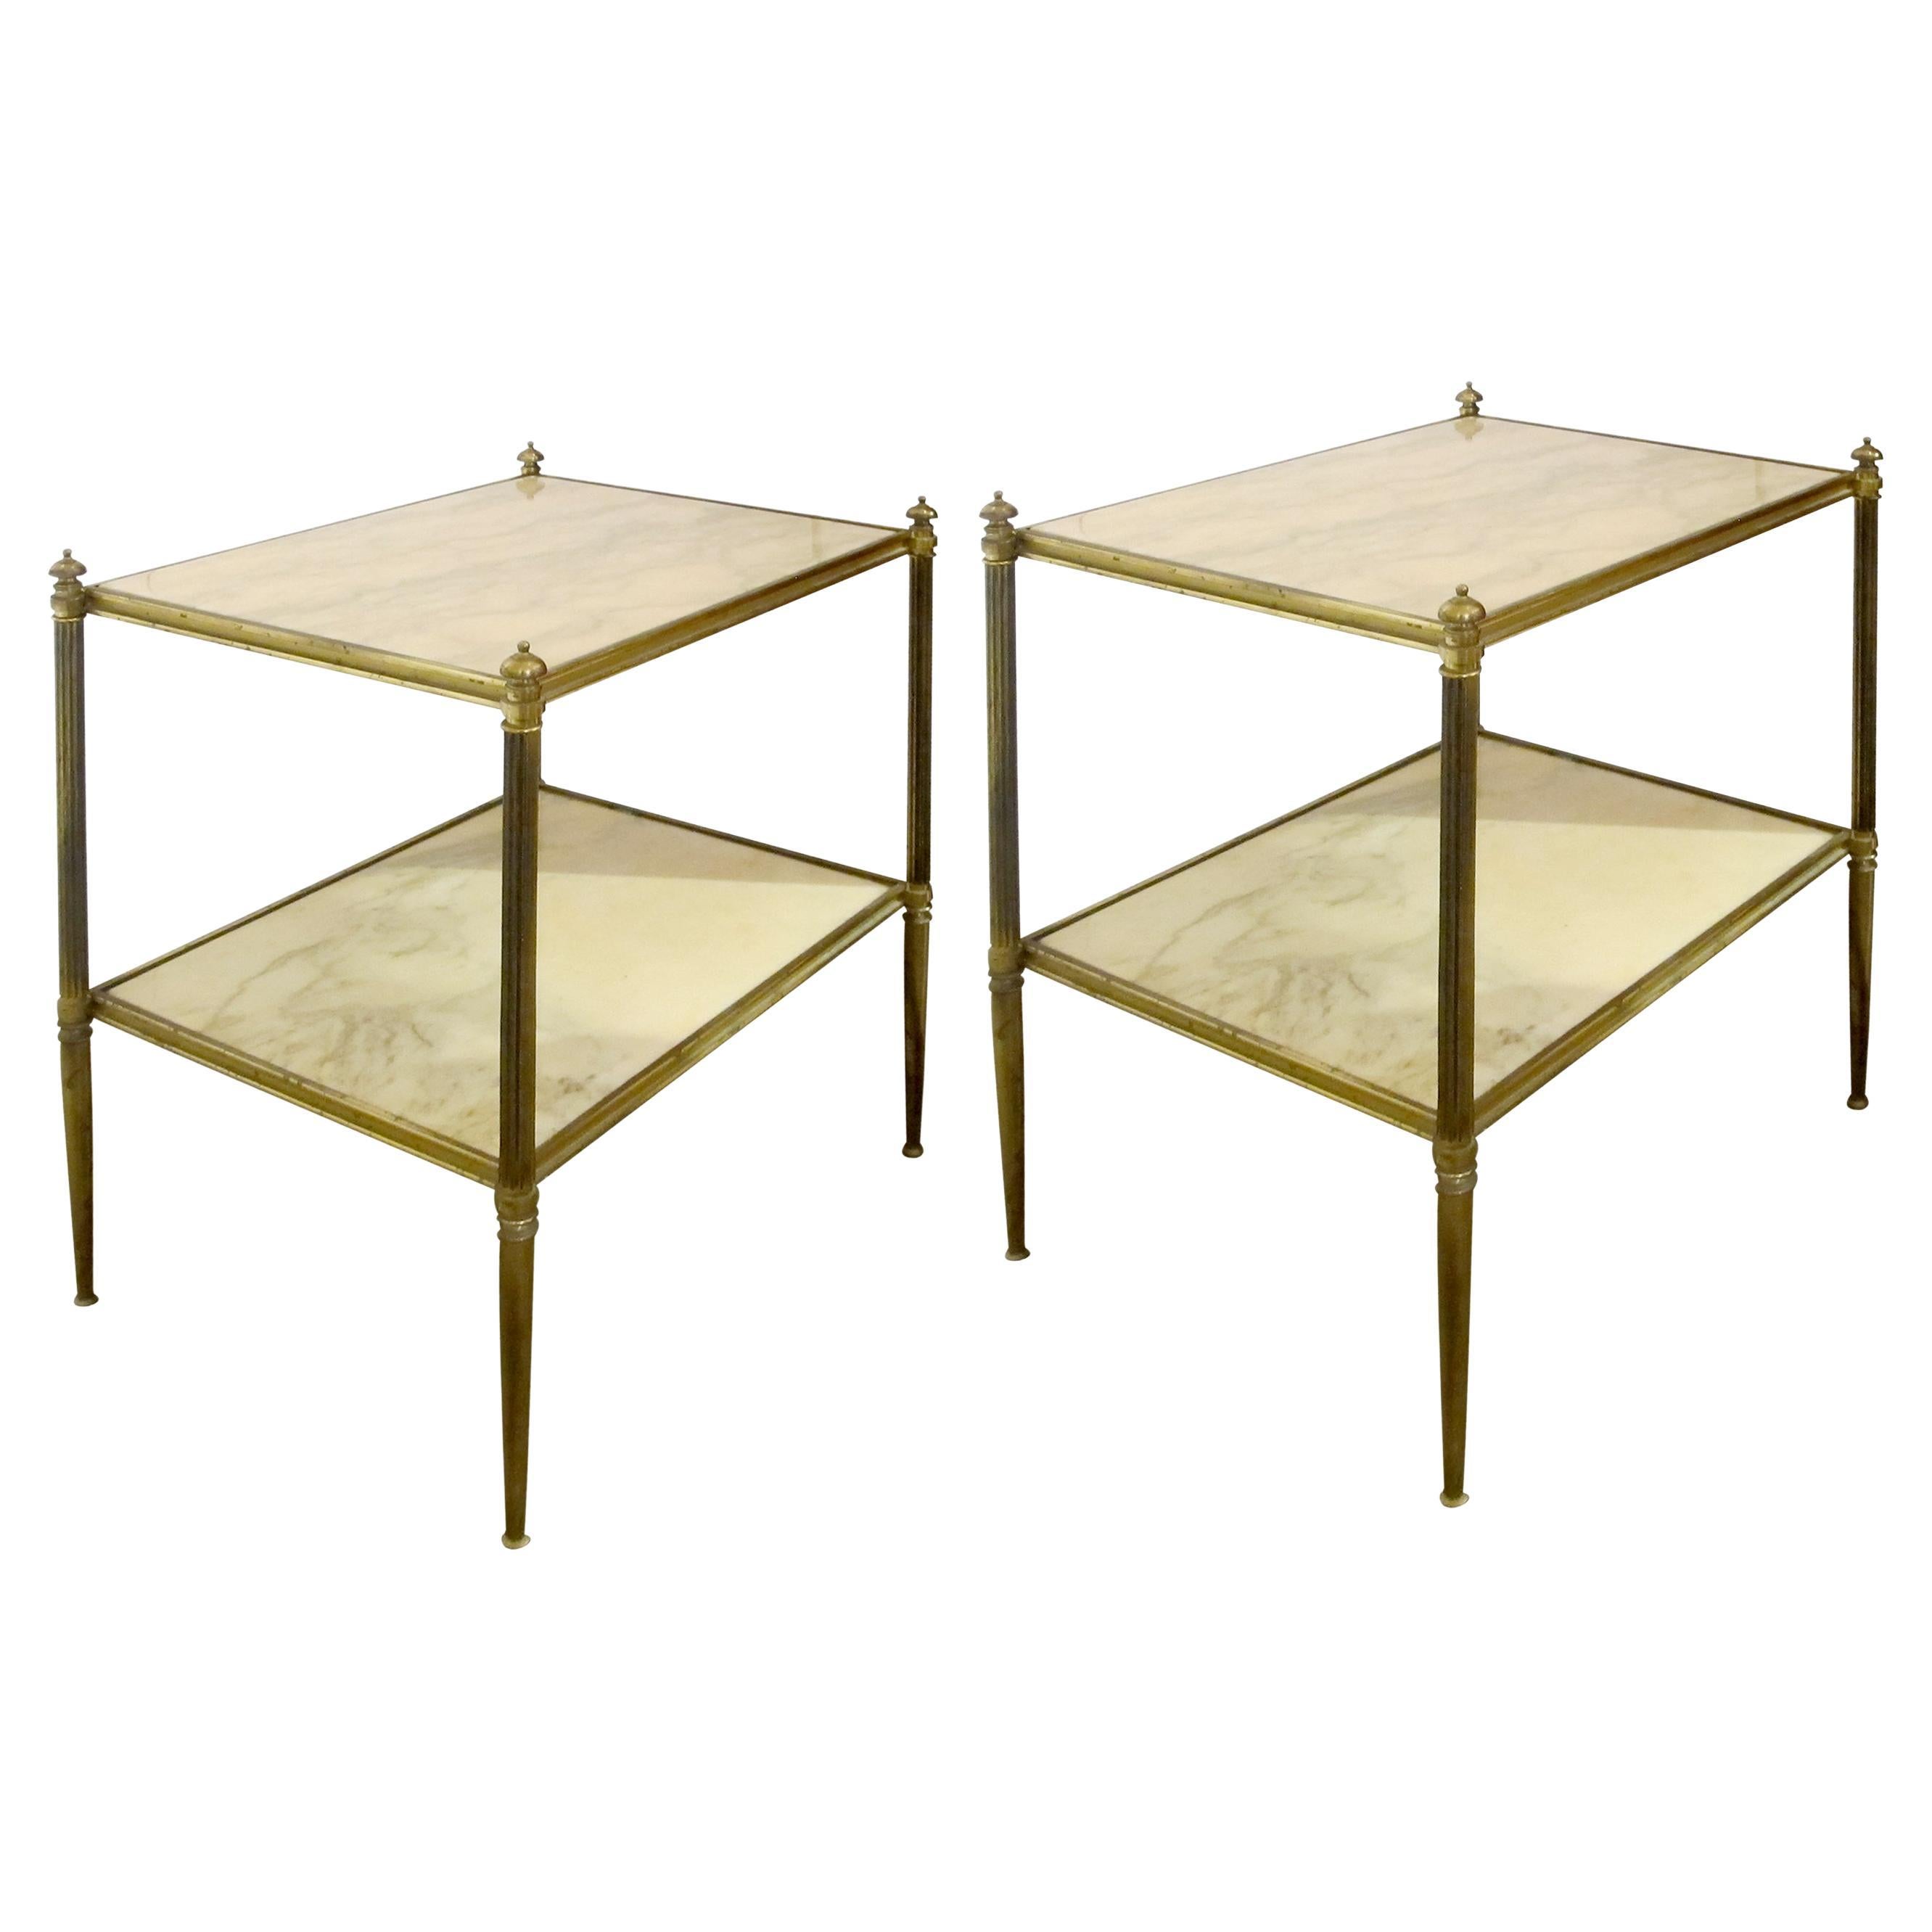 1960s Pair of Two Tiers Cream Marble Side Tables in the Style of Maison Bagues